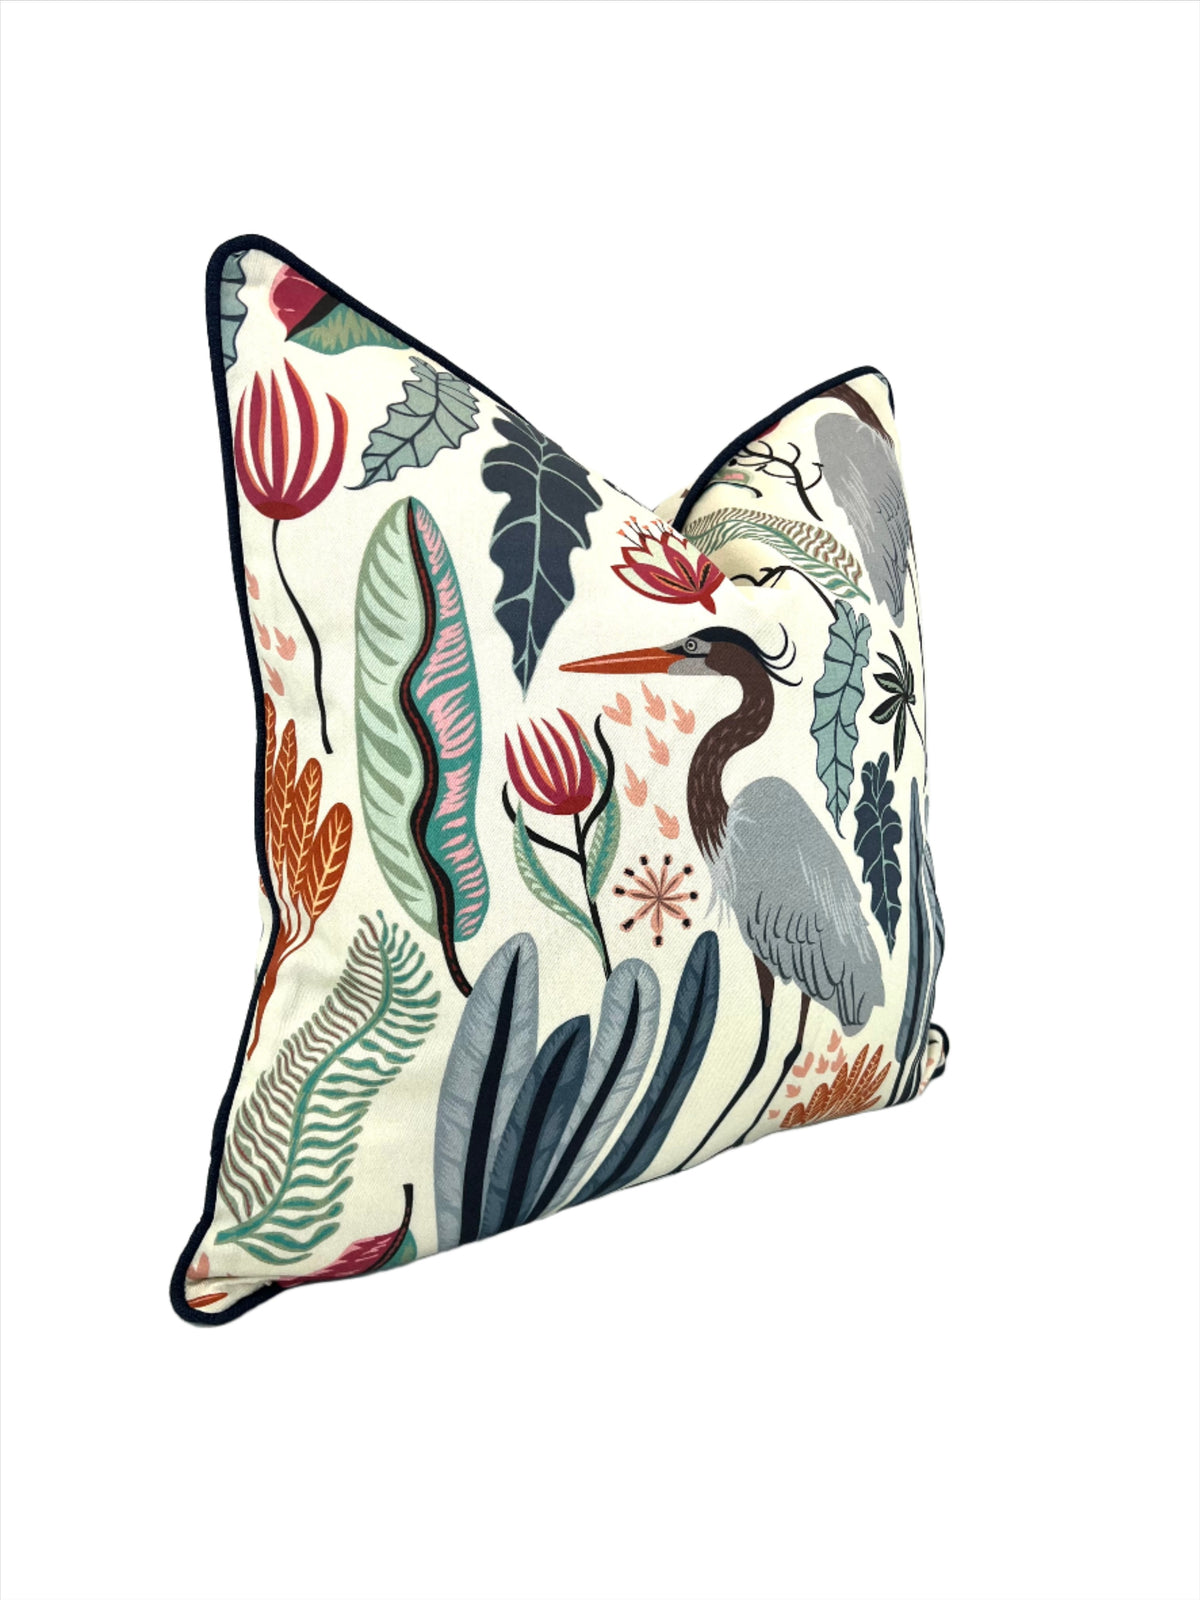 Heron & Plants Decorative Pillow Cover (Inserts Now Available!)